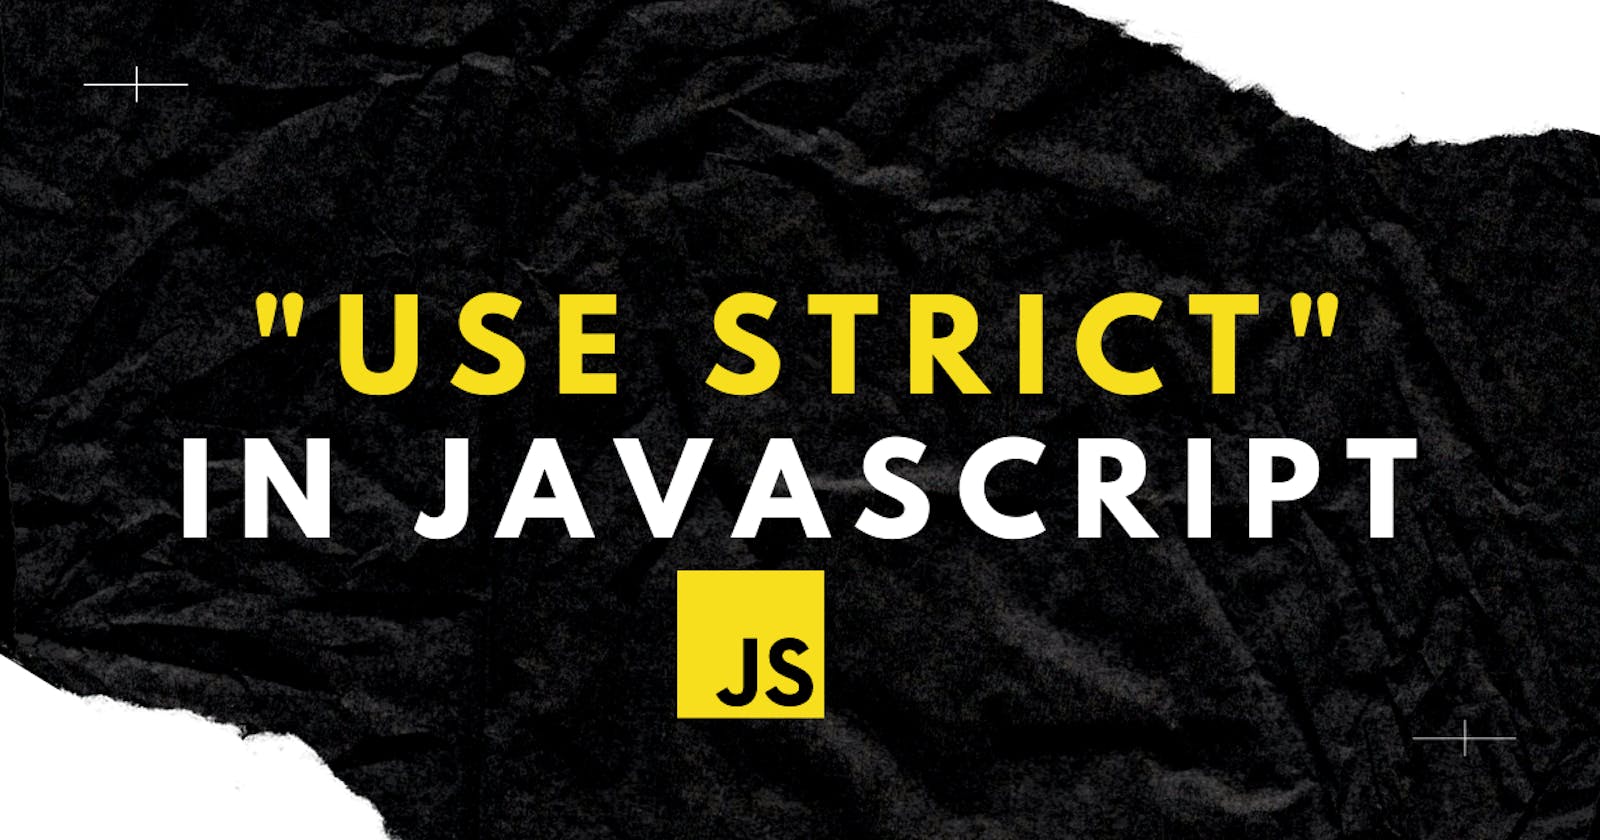 "use strict" in JavaScript